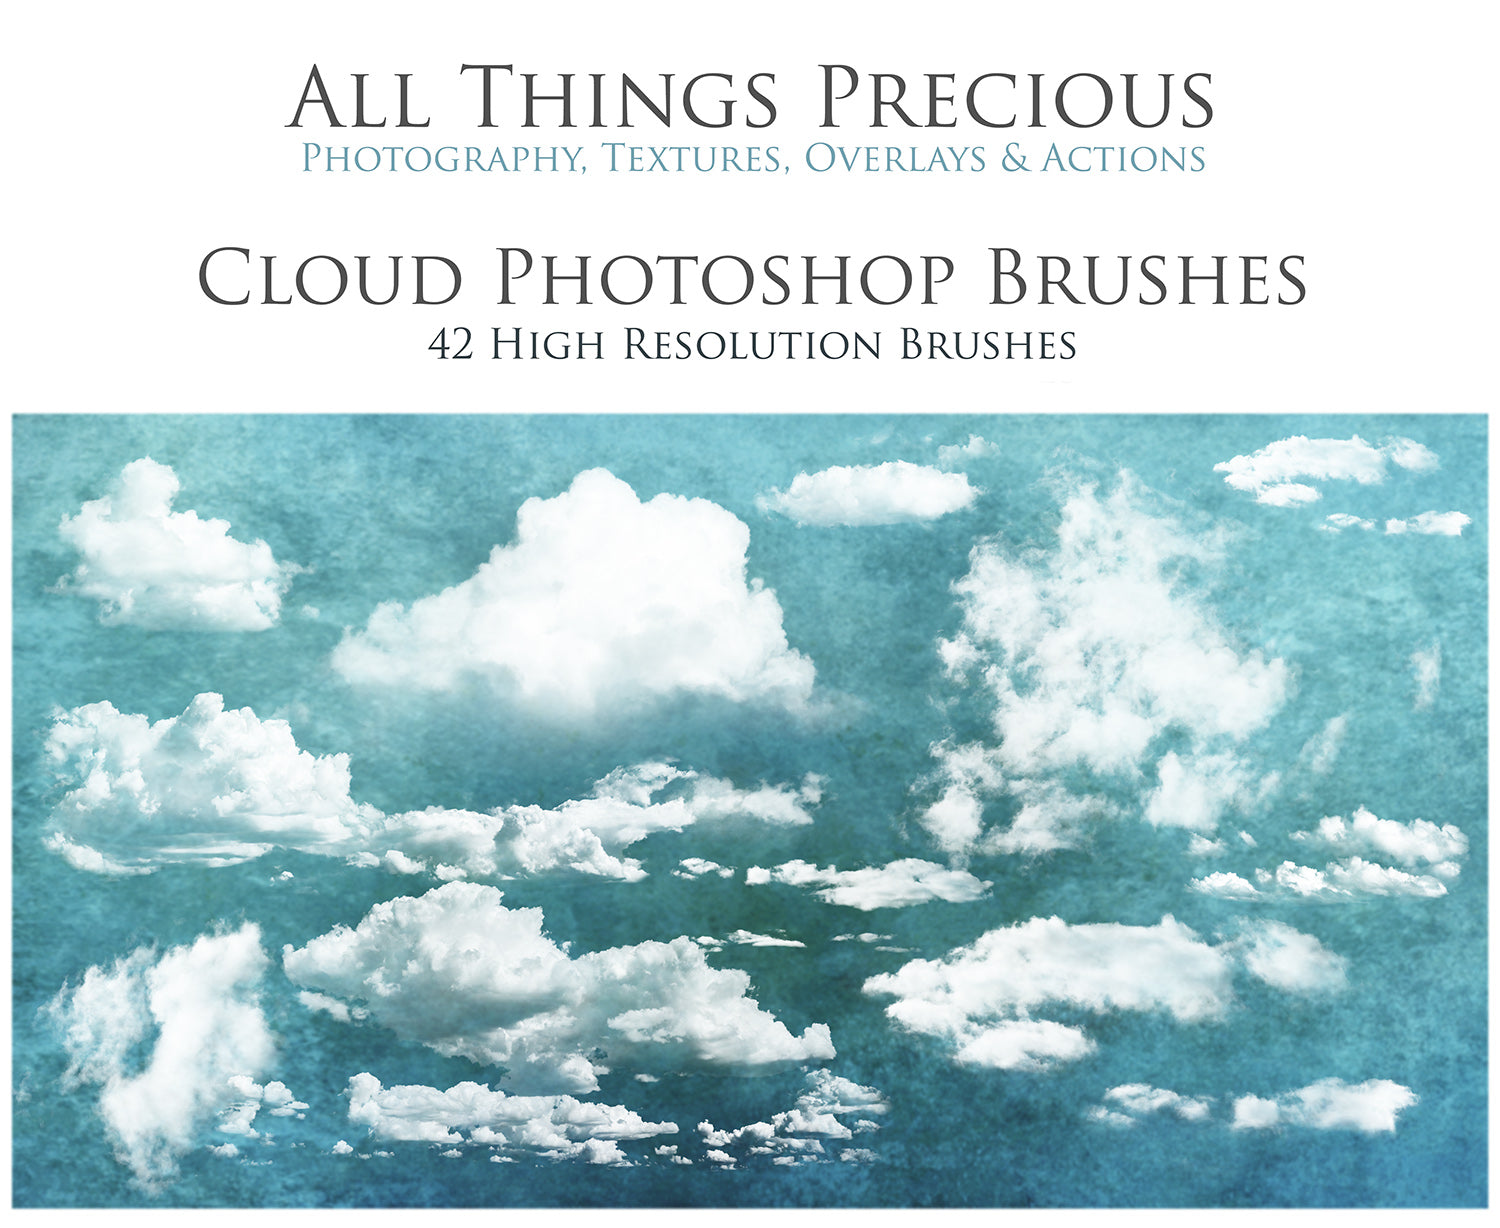 Cloud brushes for photographers. High Resolution Photoshop brushes for photography and digital design.  Digital Stamps for scrapbooking, create photo overlays and use in graphic design. Assets and Add ons. High resolution digital files.  ATP Textures 